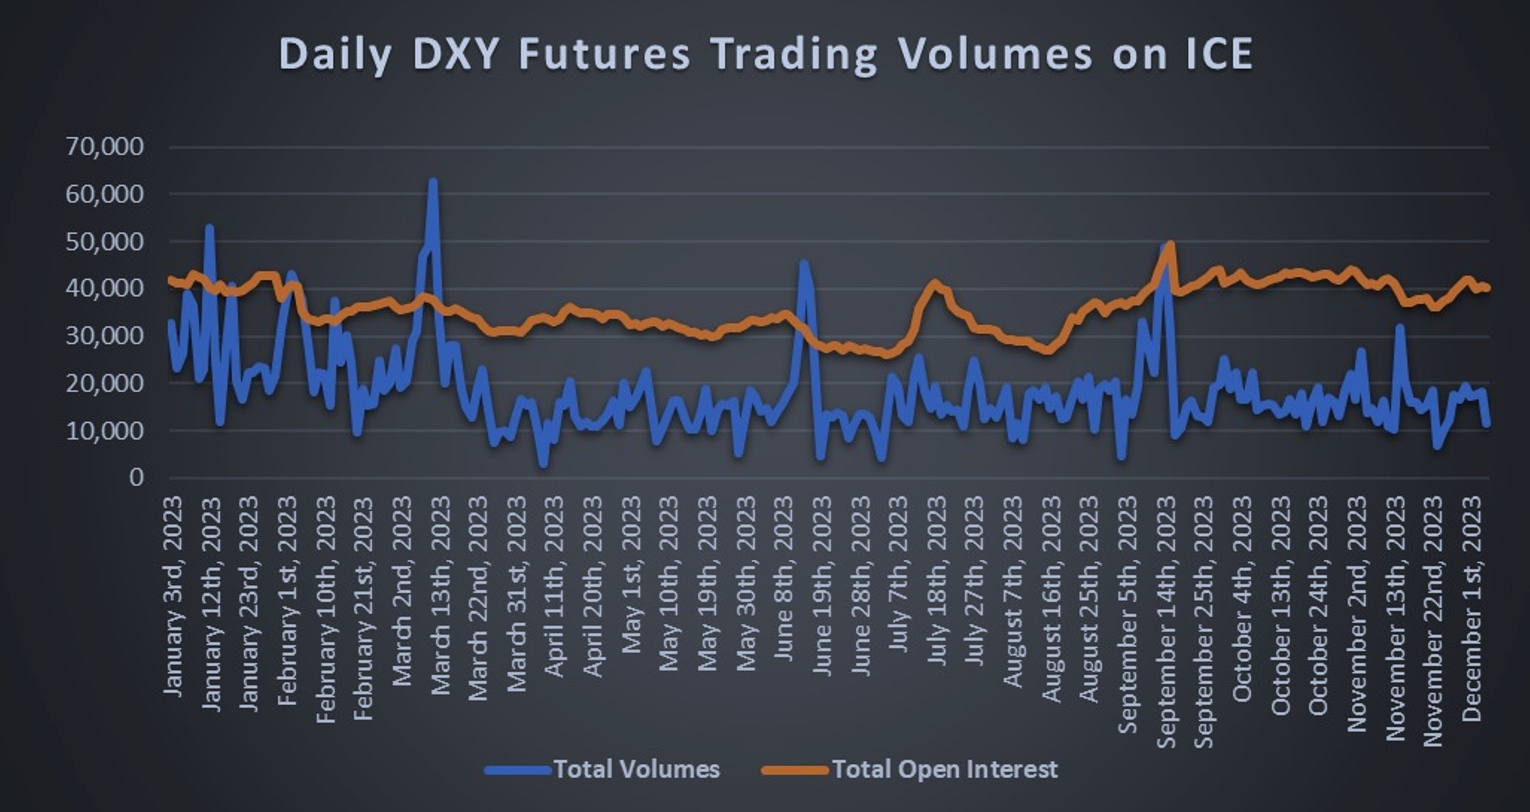 Graph showing DXY trading volumes on ICE